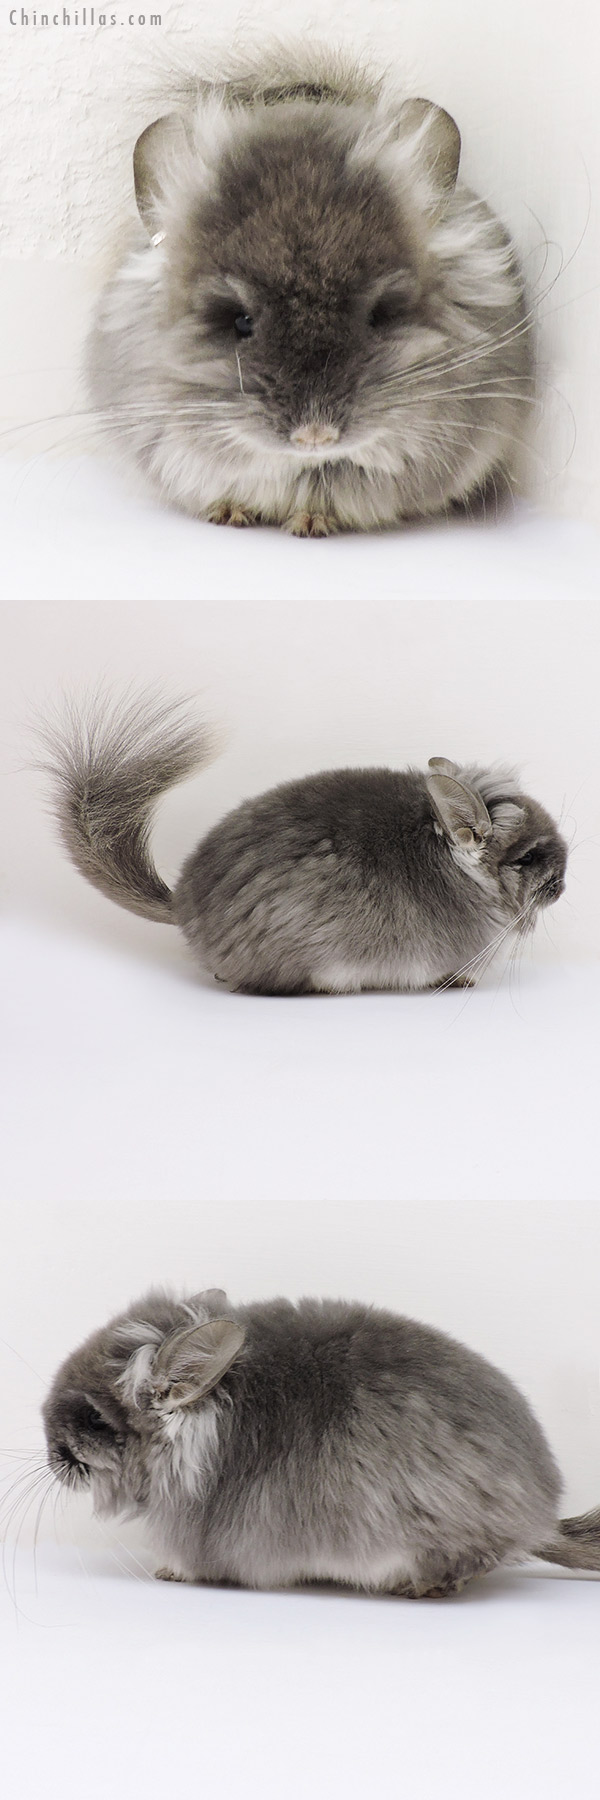 Chinchilla or related item offered for sale or export on Chinchillas.com - 16138 Exceptional TOV Violet G2  Royal Persian Angora Male Chinchilla w/ full lion mane and ear tufts